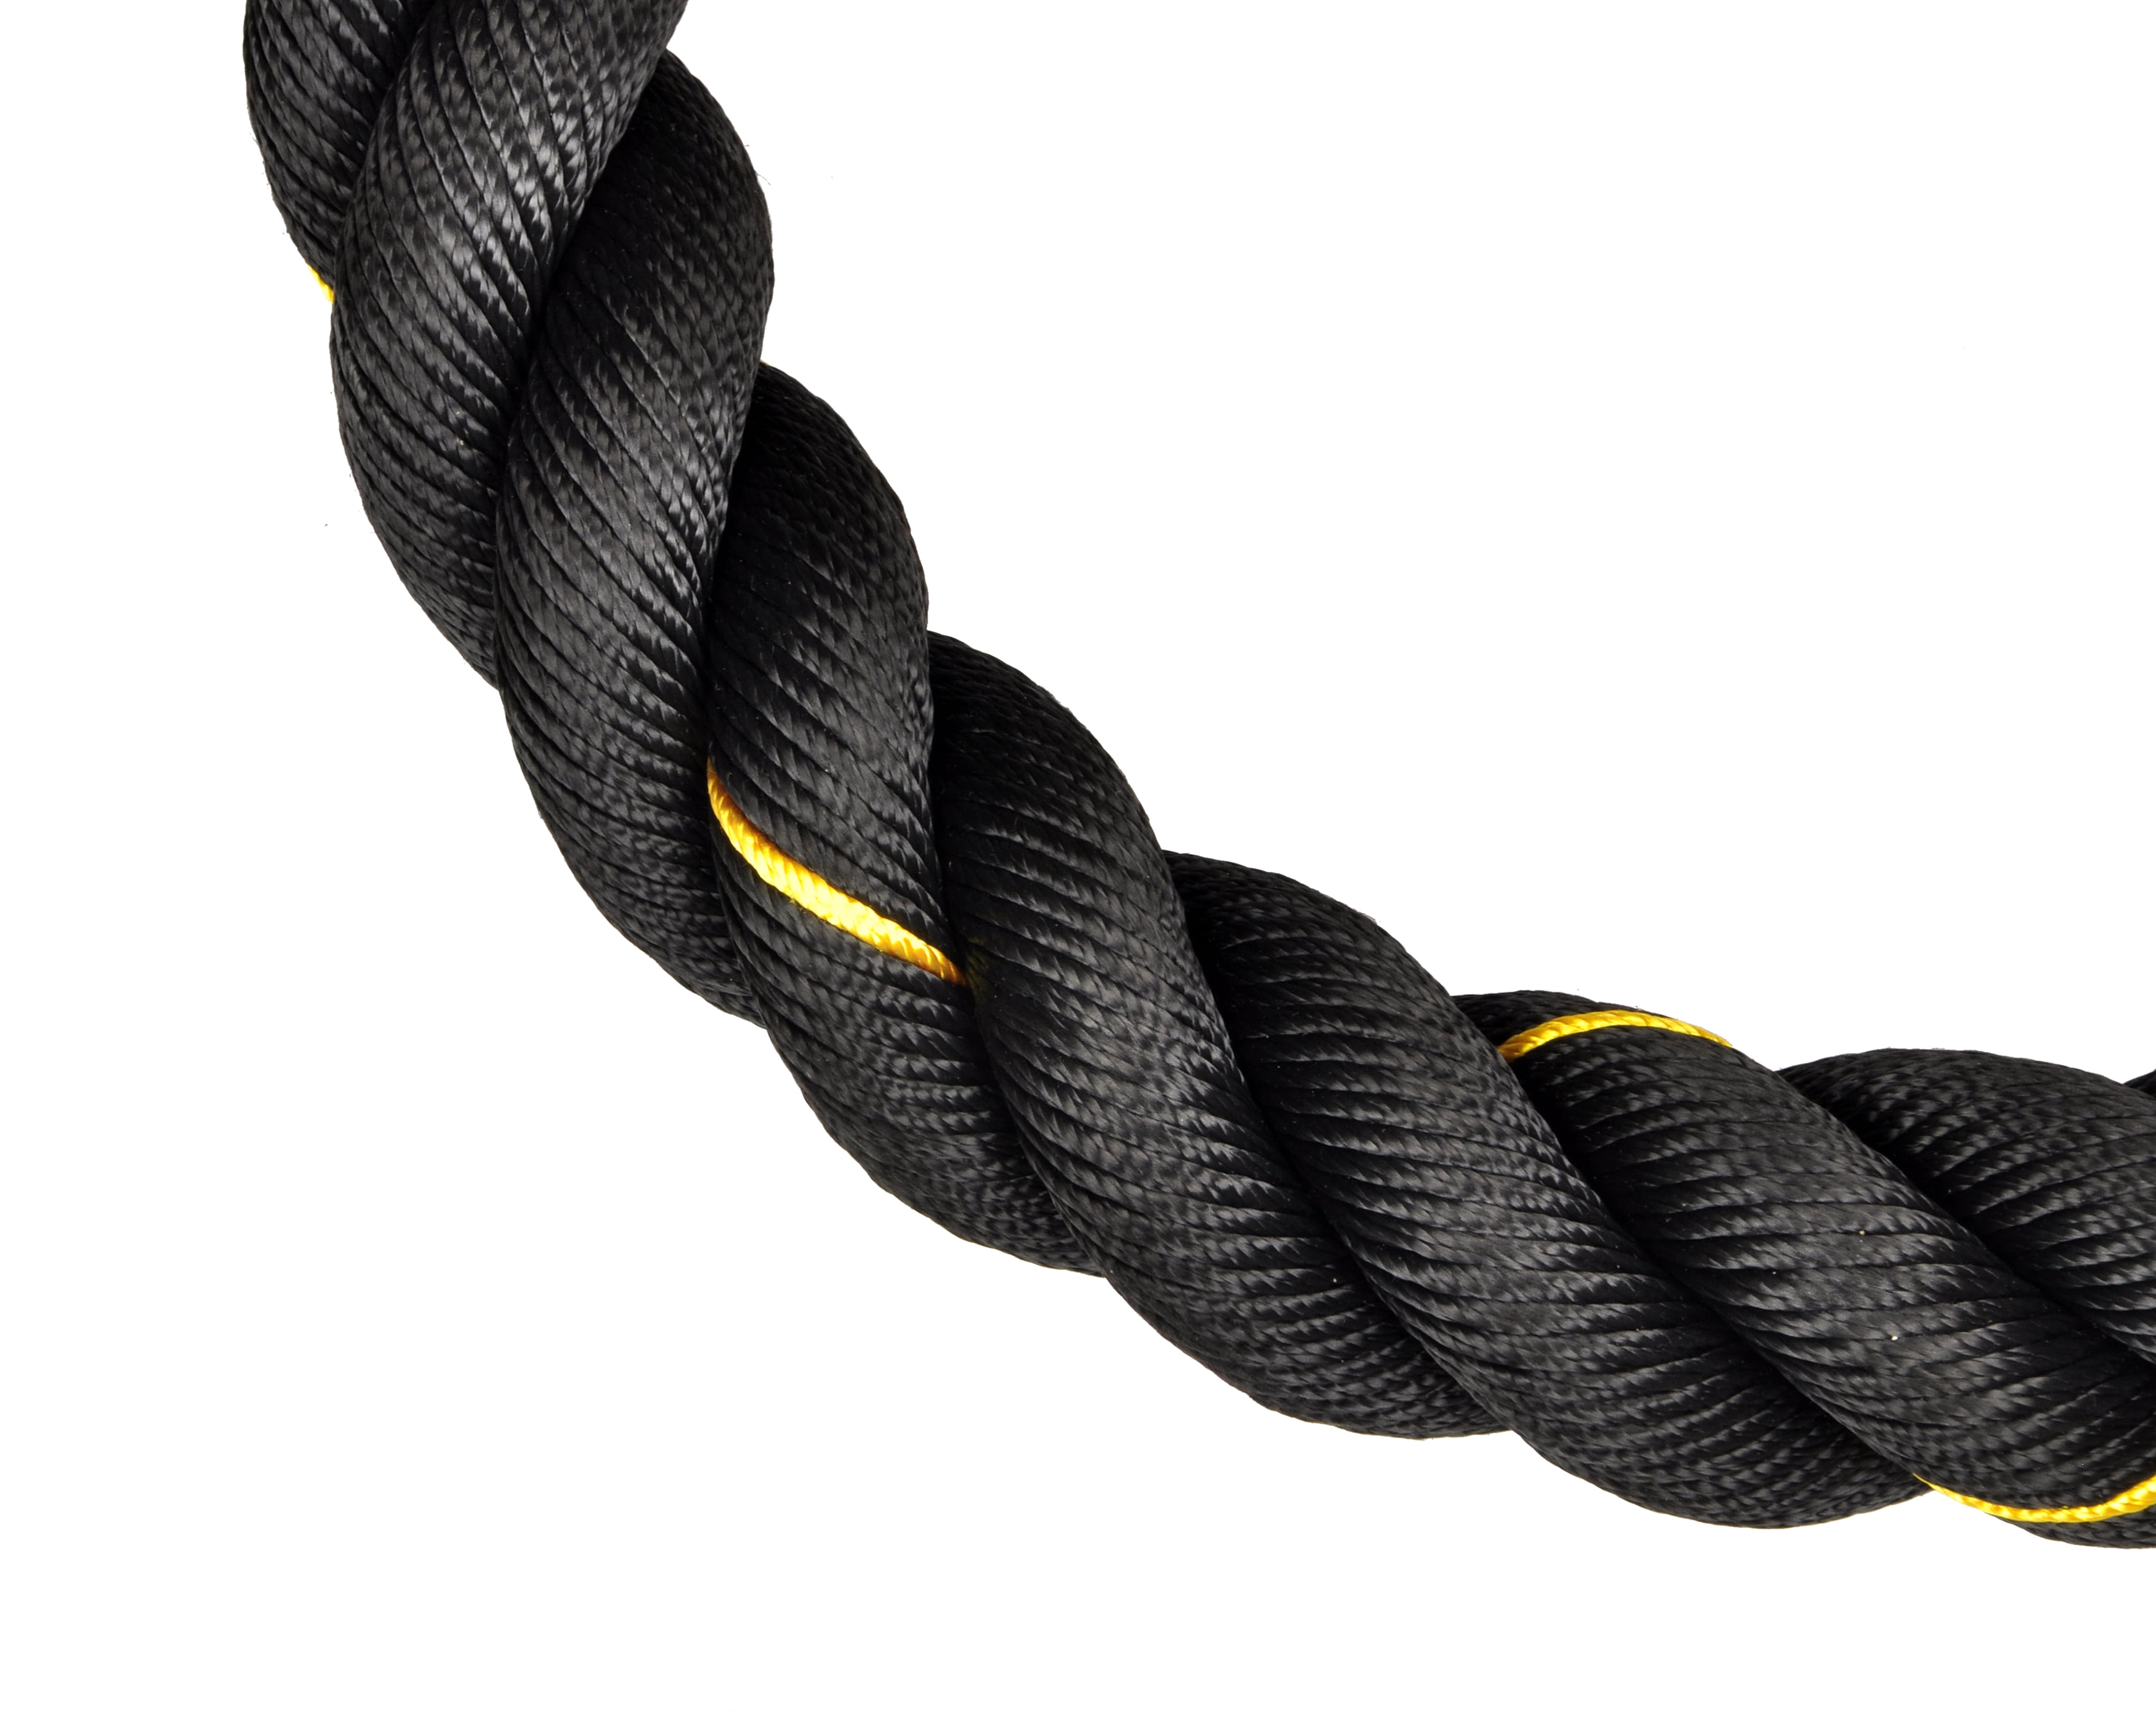 BODY SPORT TRAINING ROPE, 15' LONG, 2 DIAMETER, BLACK POLYPROPYLENE ROPE  WITH BLACK HANDLE, D-RING ATTACHED